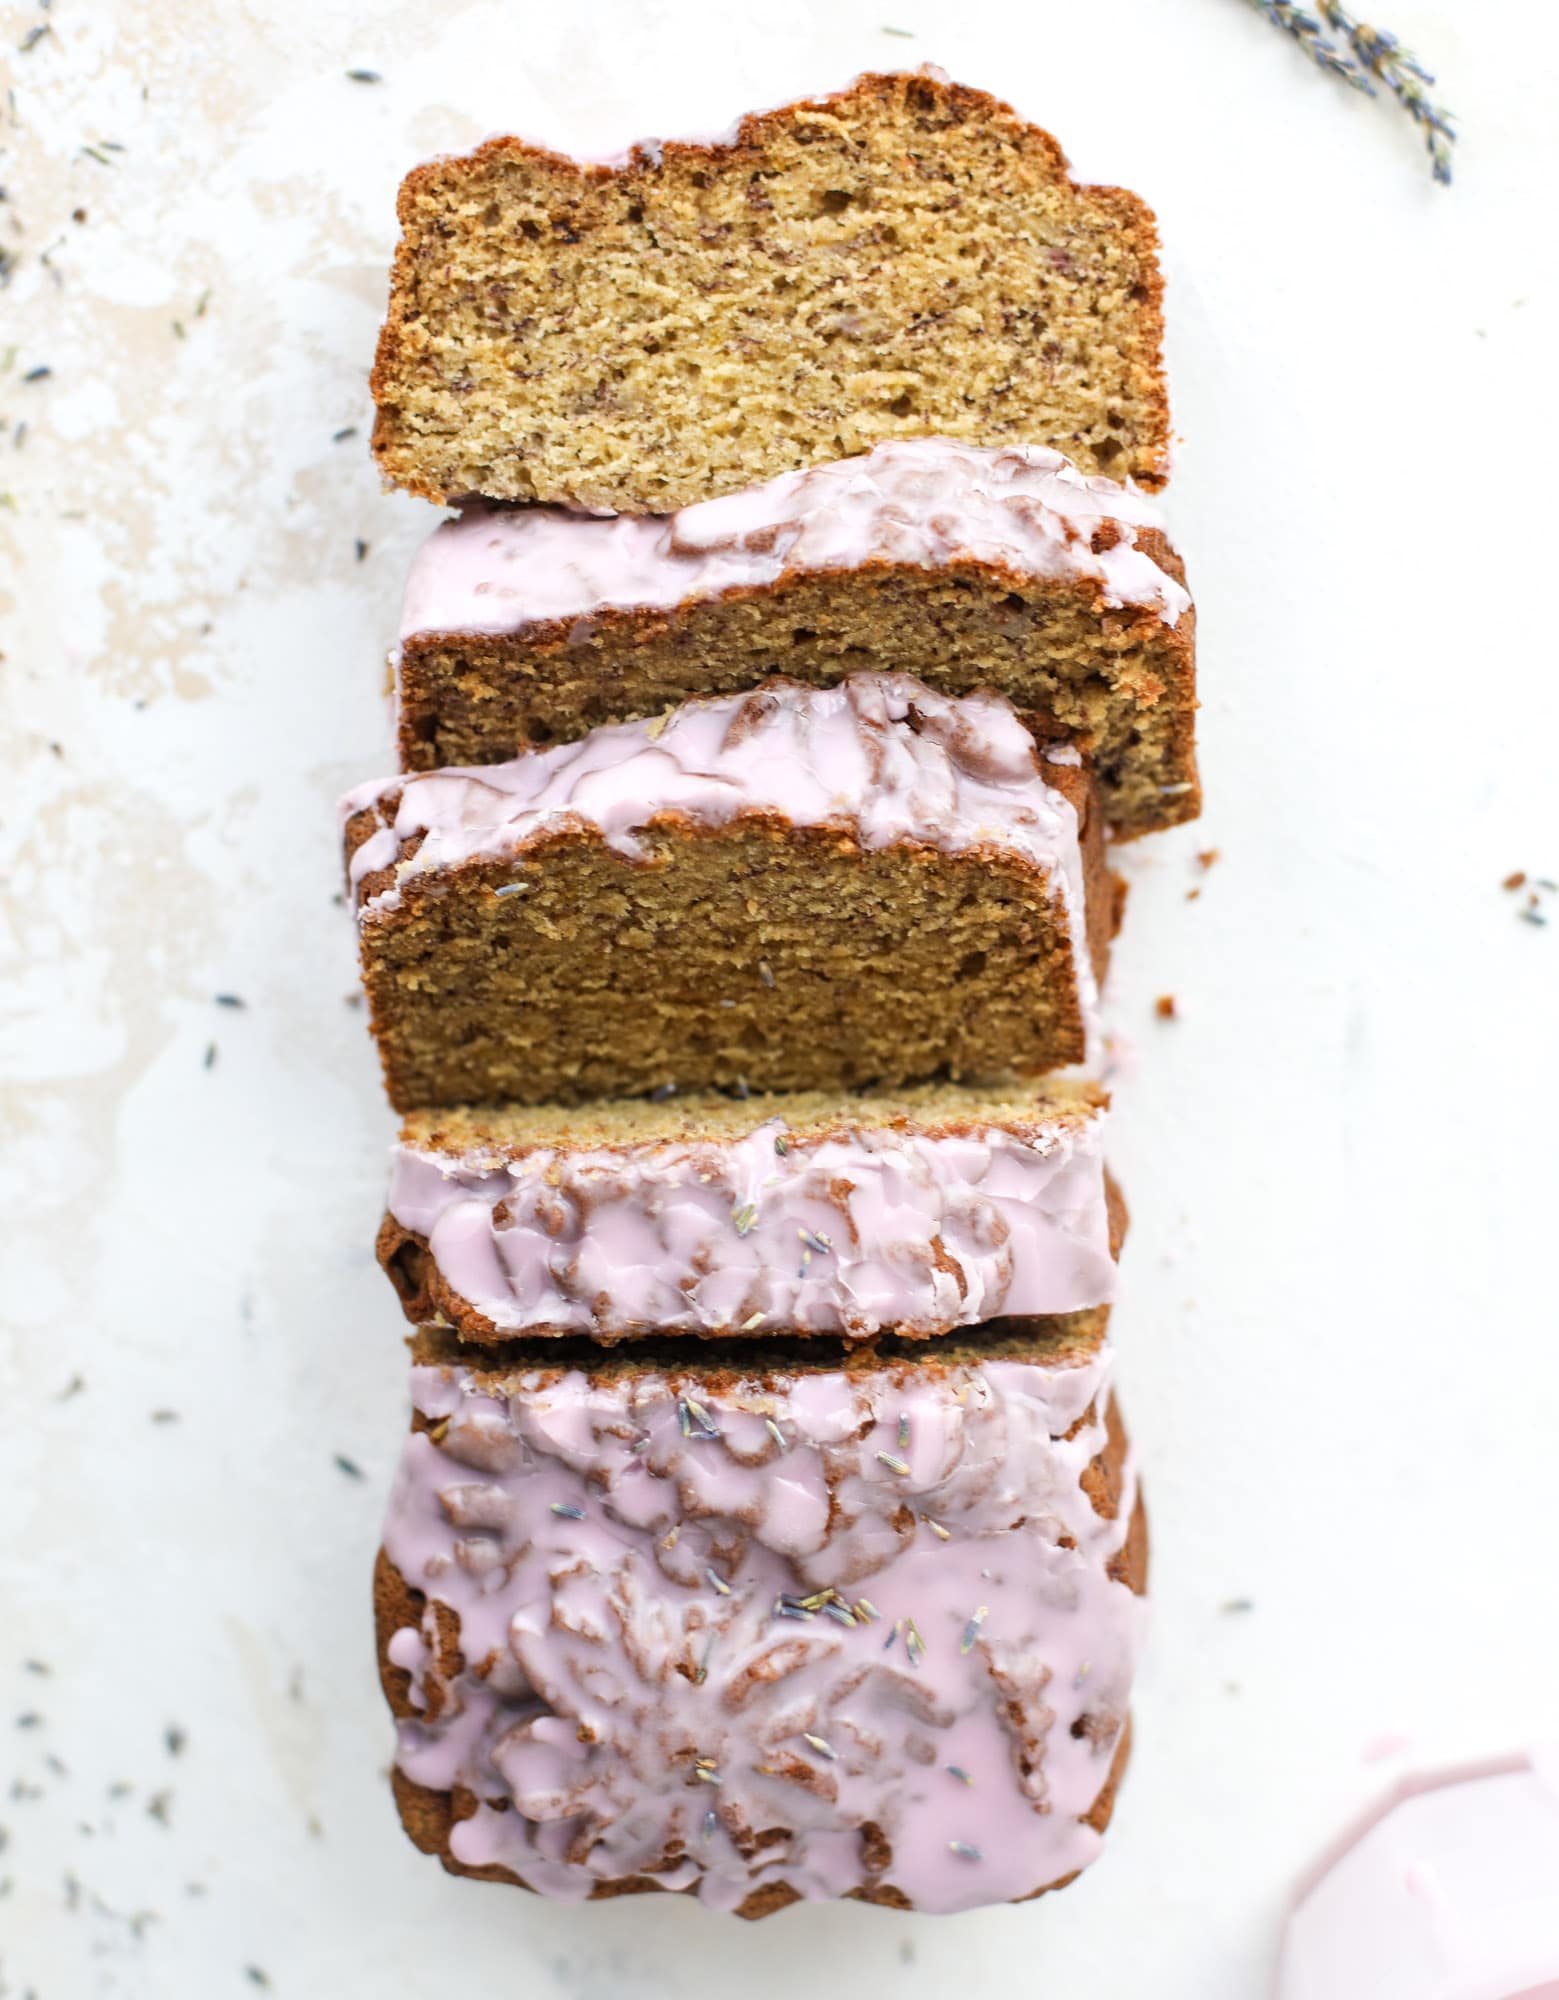 This lavender banana bread is a fresh, modern spring spin on the classic! The light flavor of lavender gives this banana bread a whimsical twist. I howsweeteats.com #lavender #bananabread